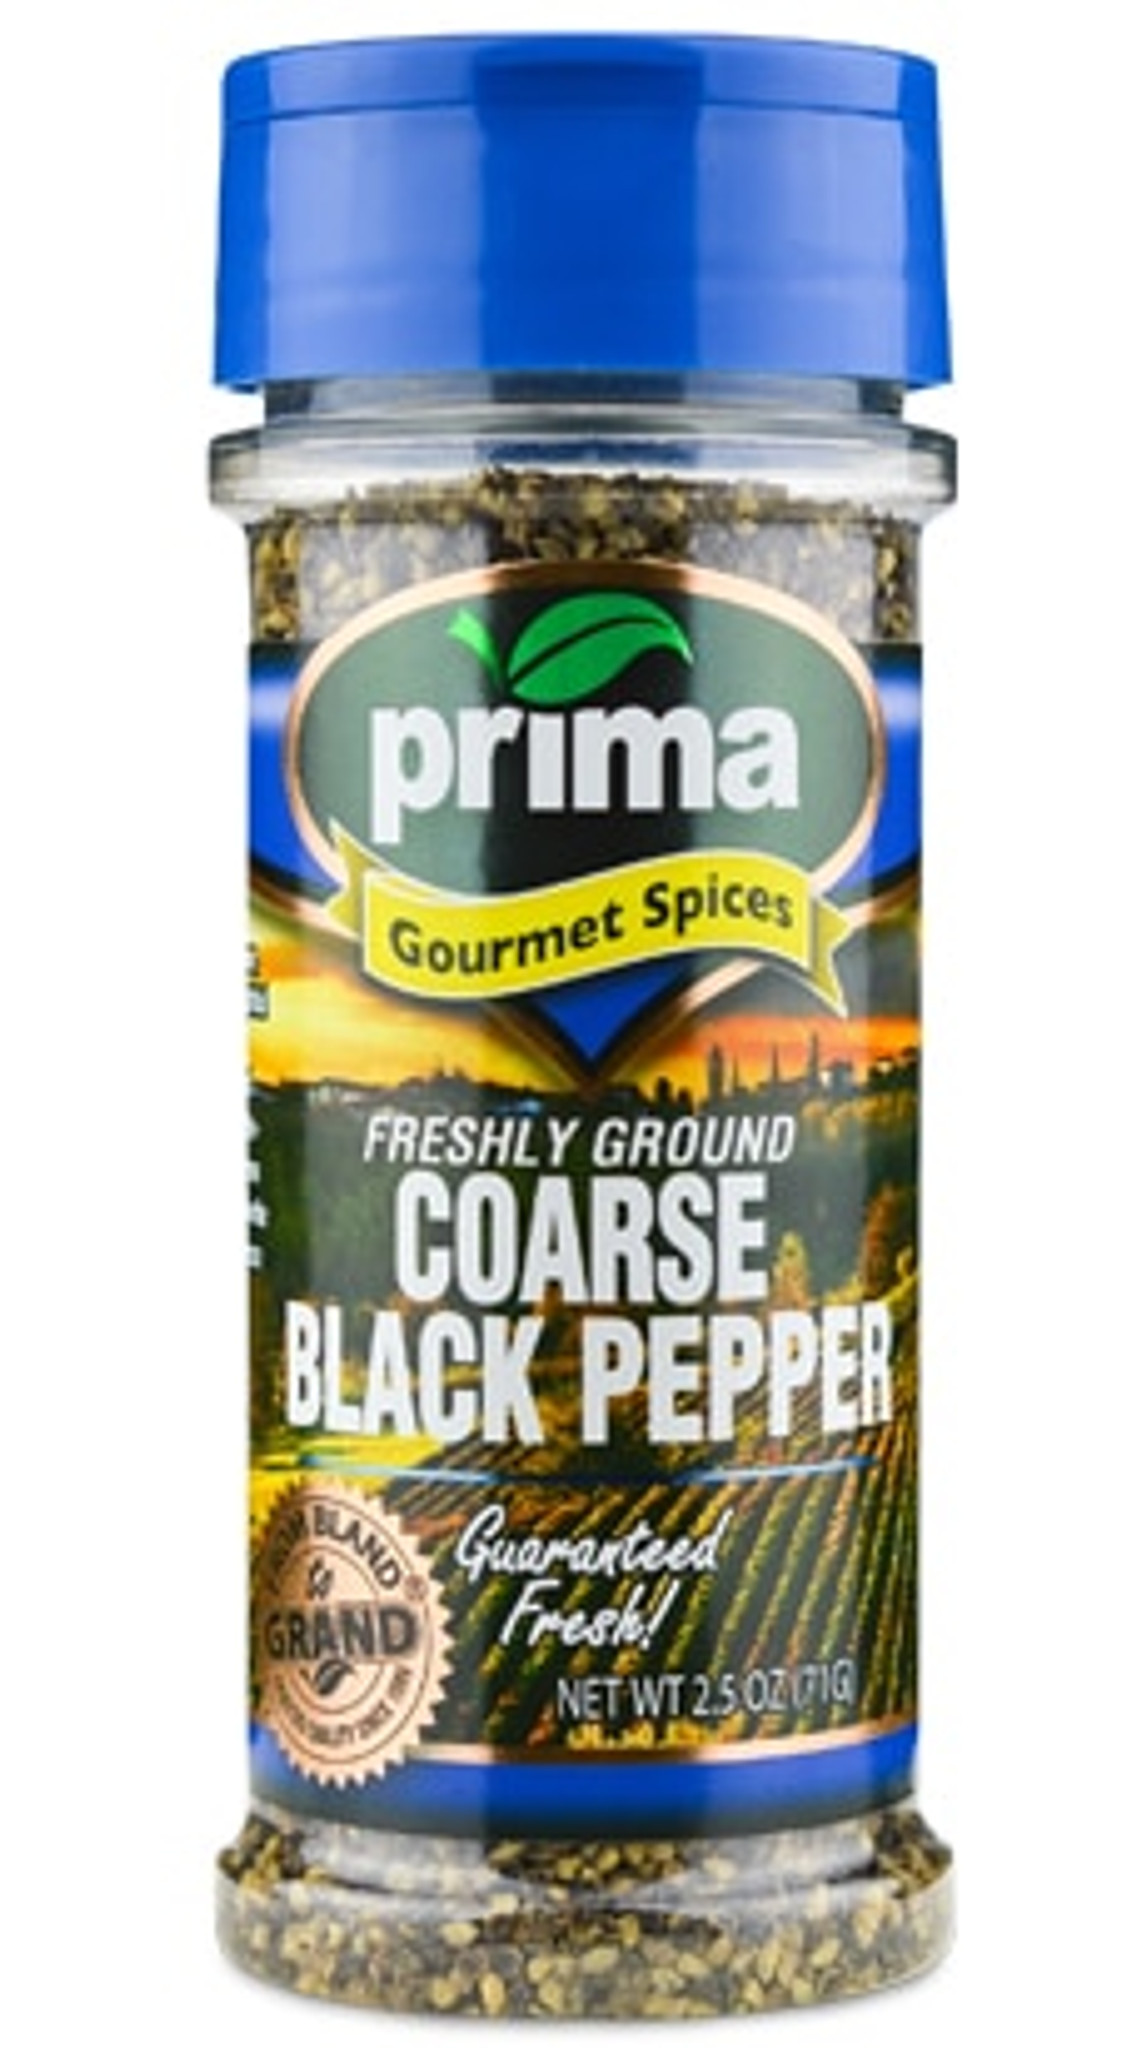 Prima Spice Premium Coarse Freshly Ground Gourmet Black Pepper 13 Ounce  18-24 Mesh Size - Great for Cooking, Rubs and Seasoning : :  Everything Else